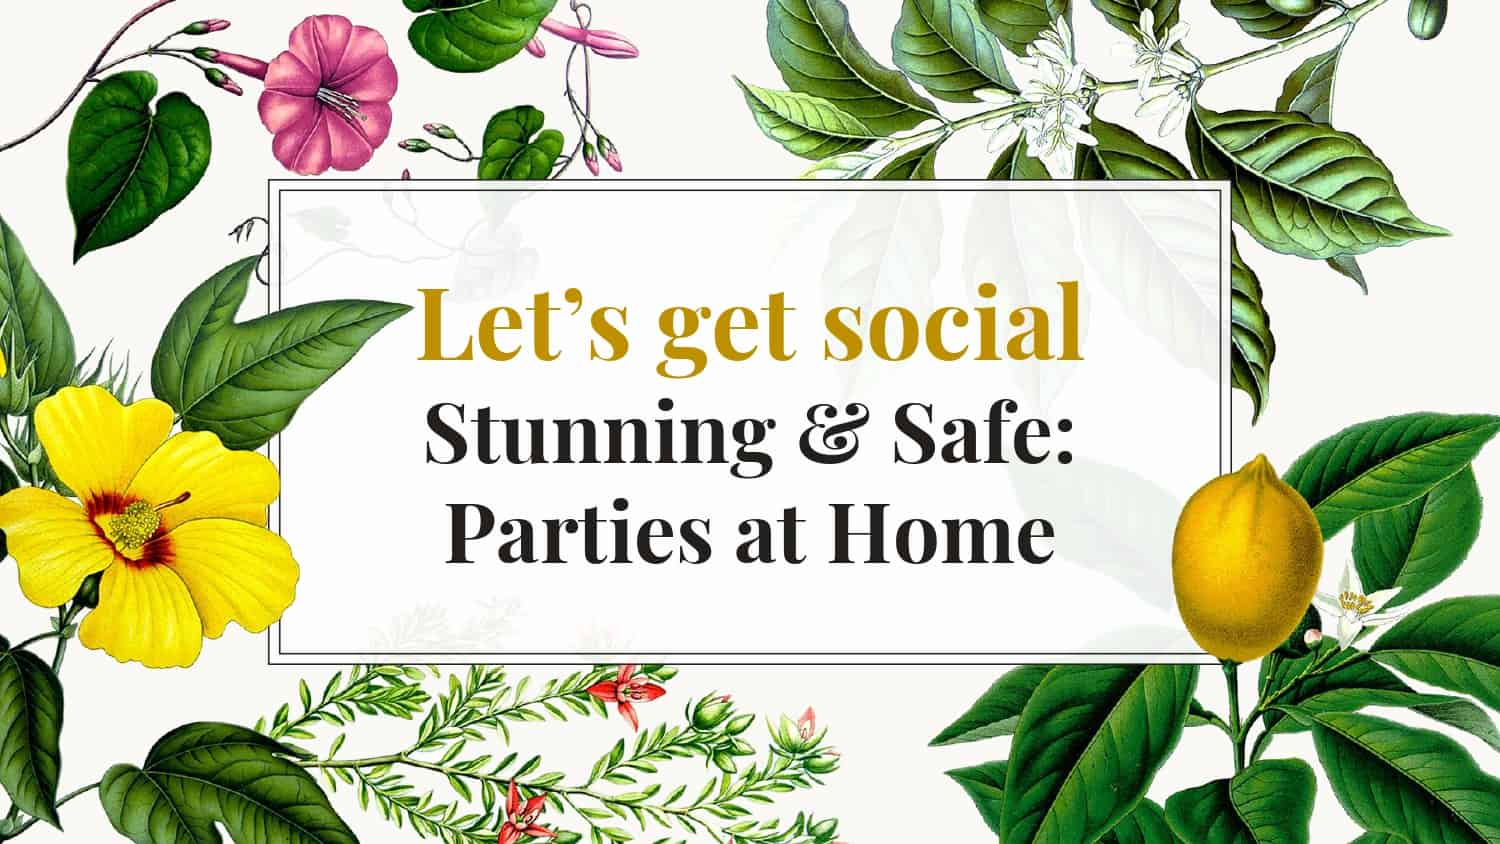 Covid Events Bristol - Parties at Home